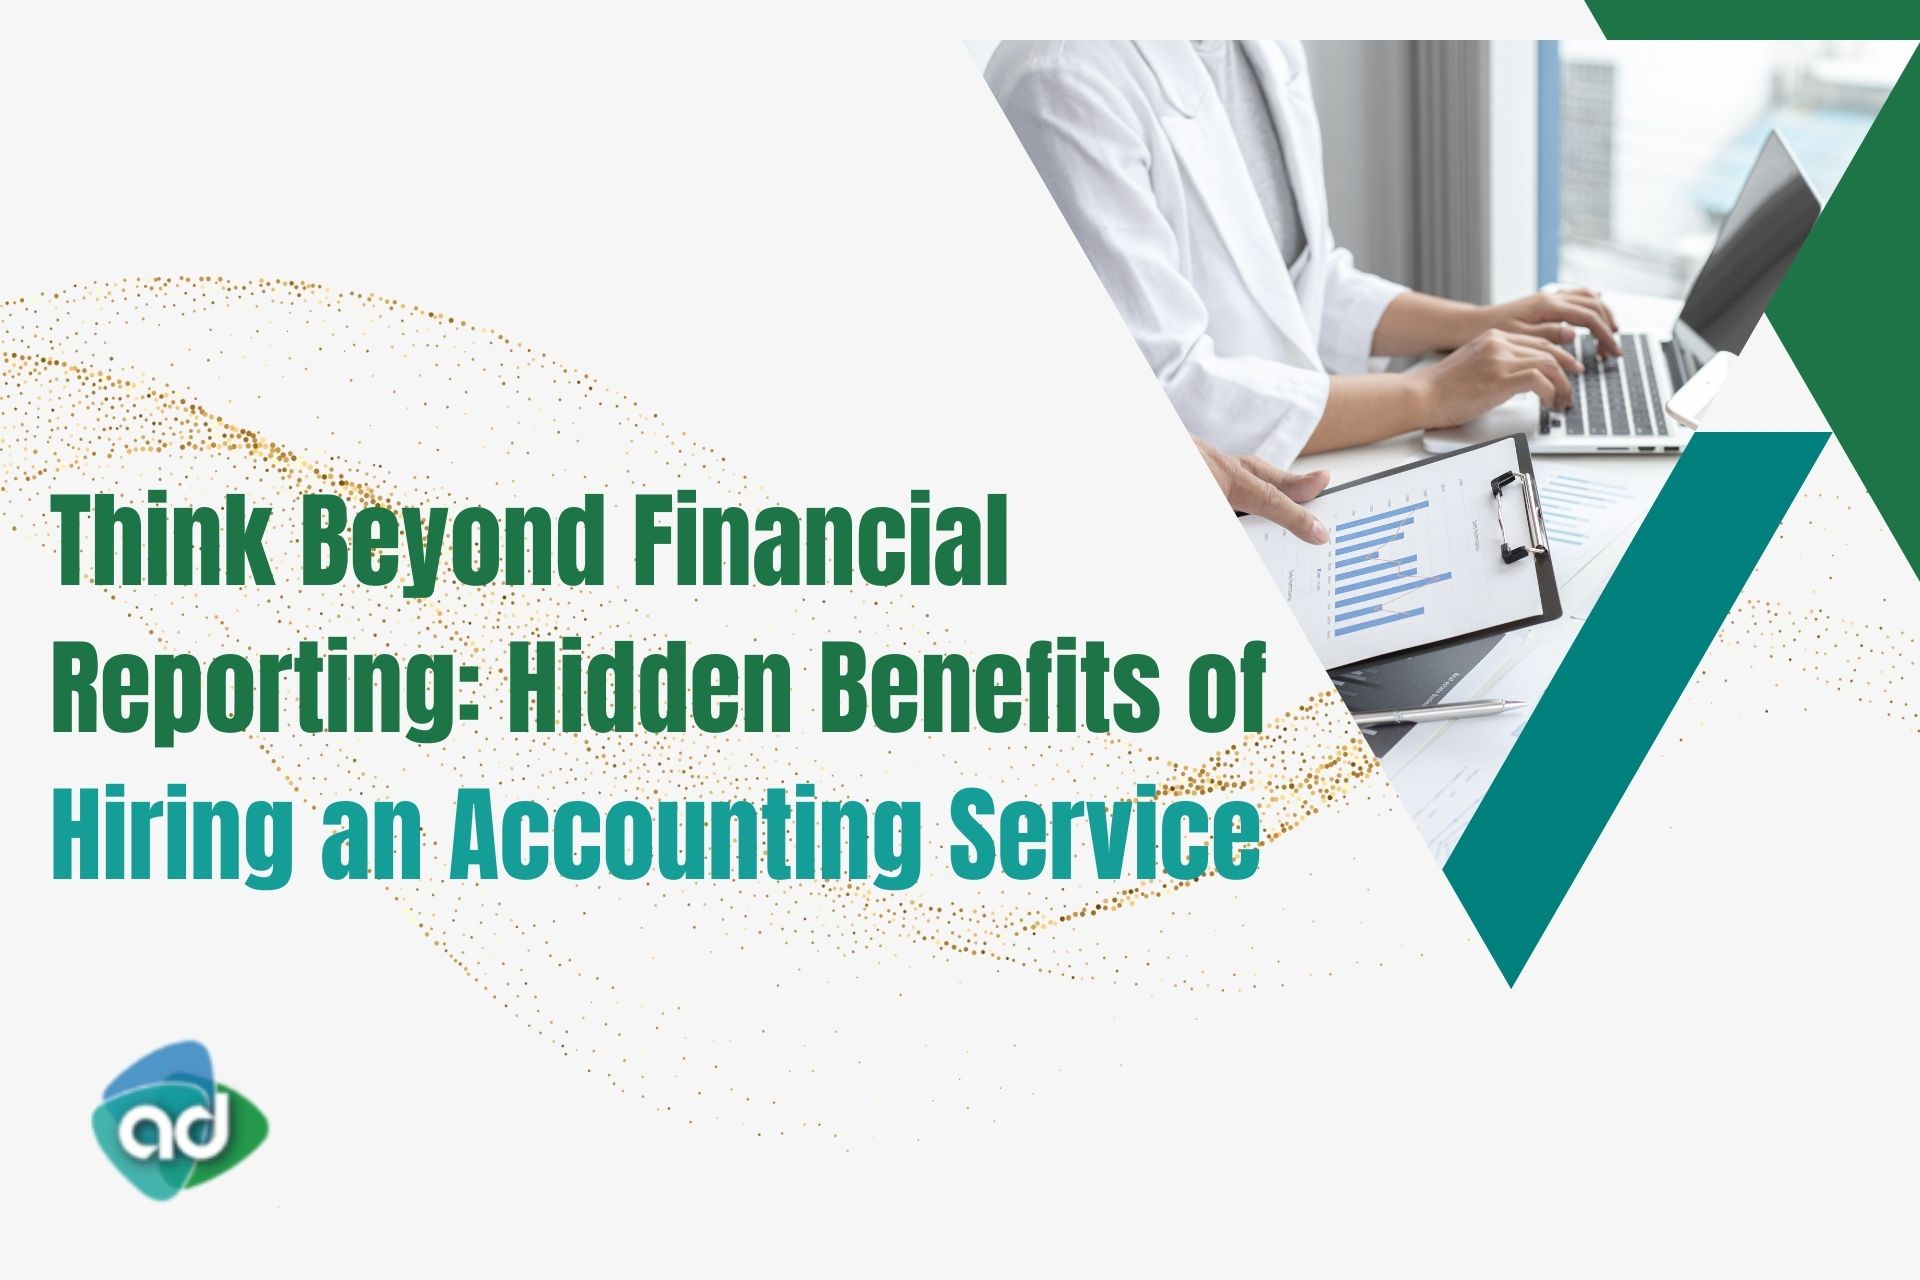 Think Beyond Financial Reporting: Hidden Benefits of Hiring an Accounting Service